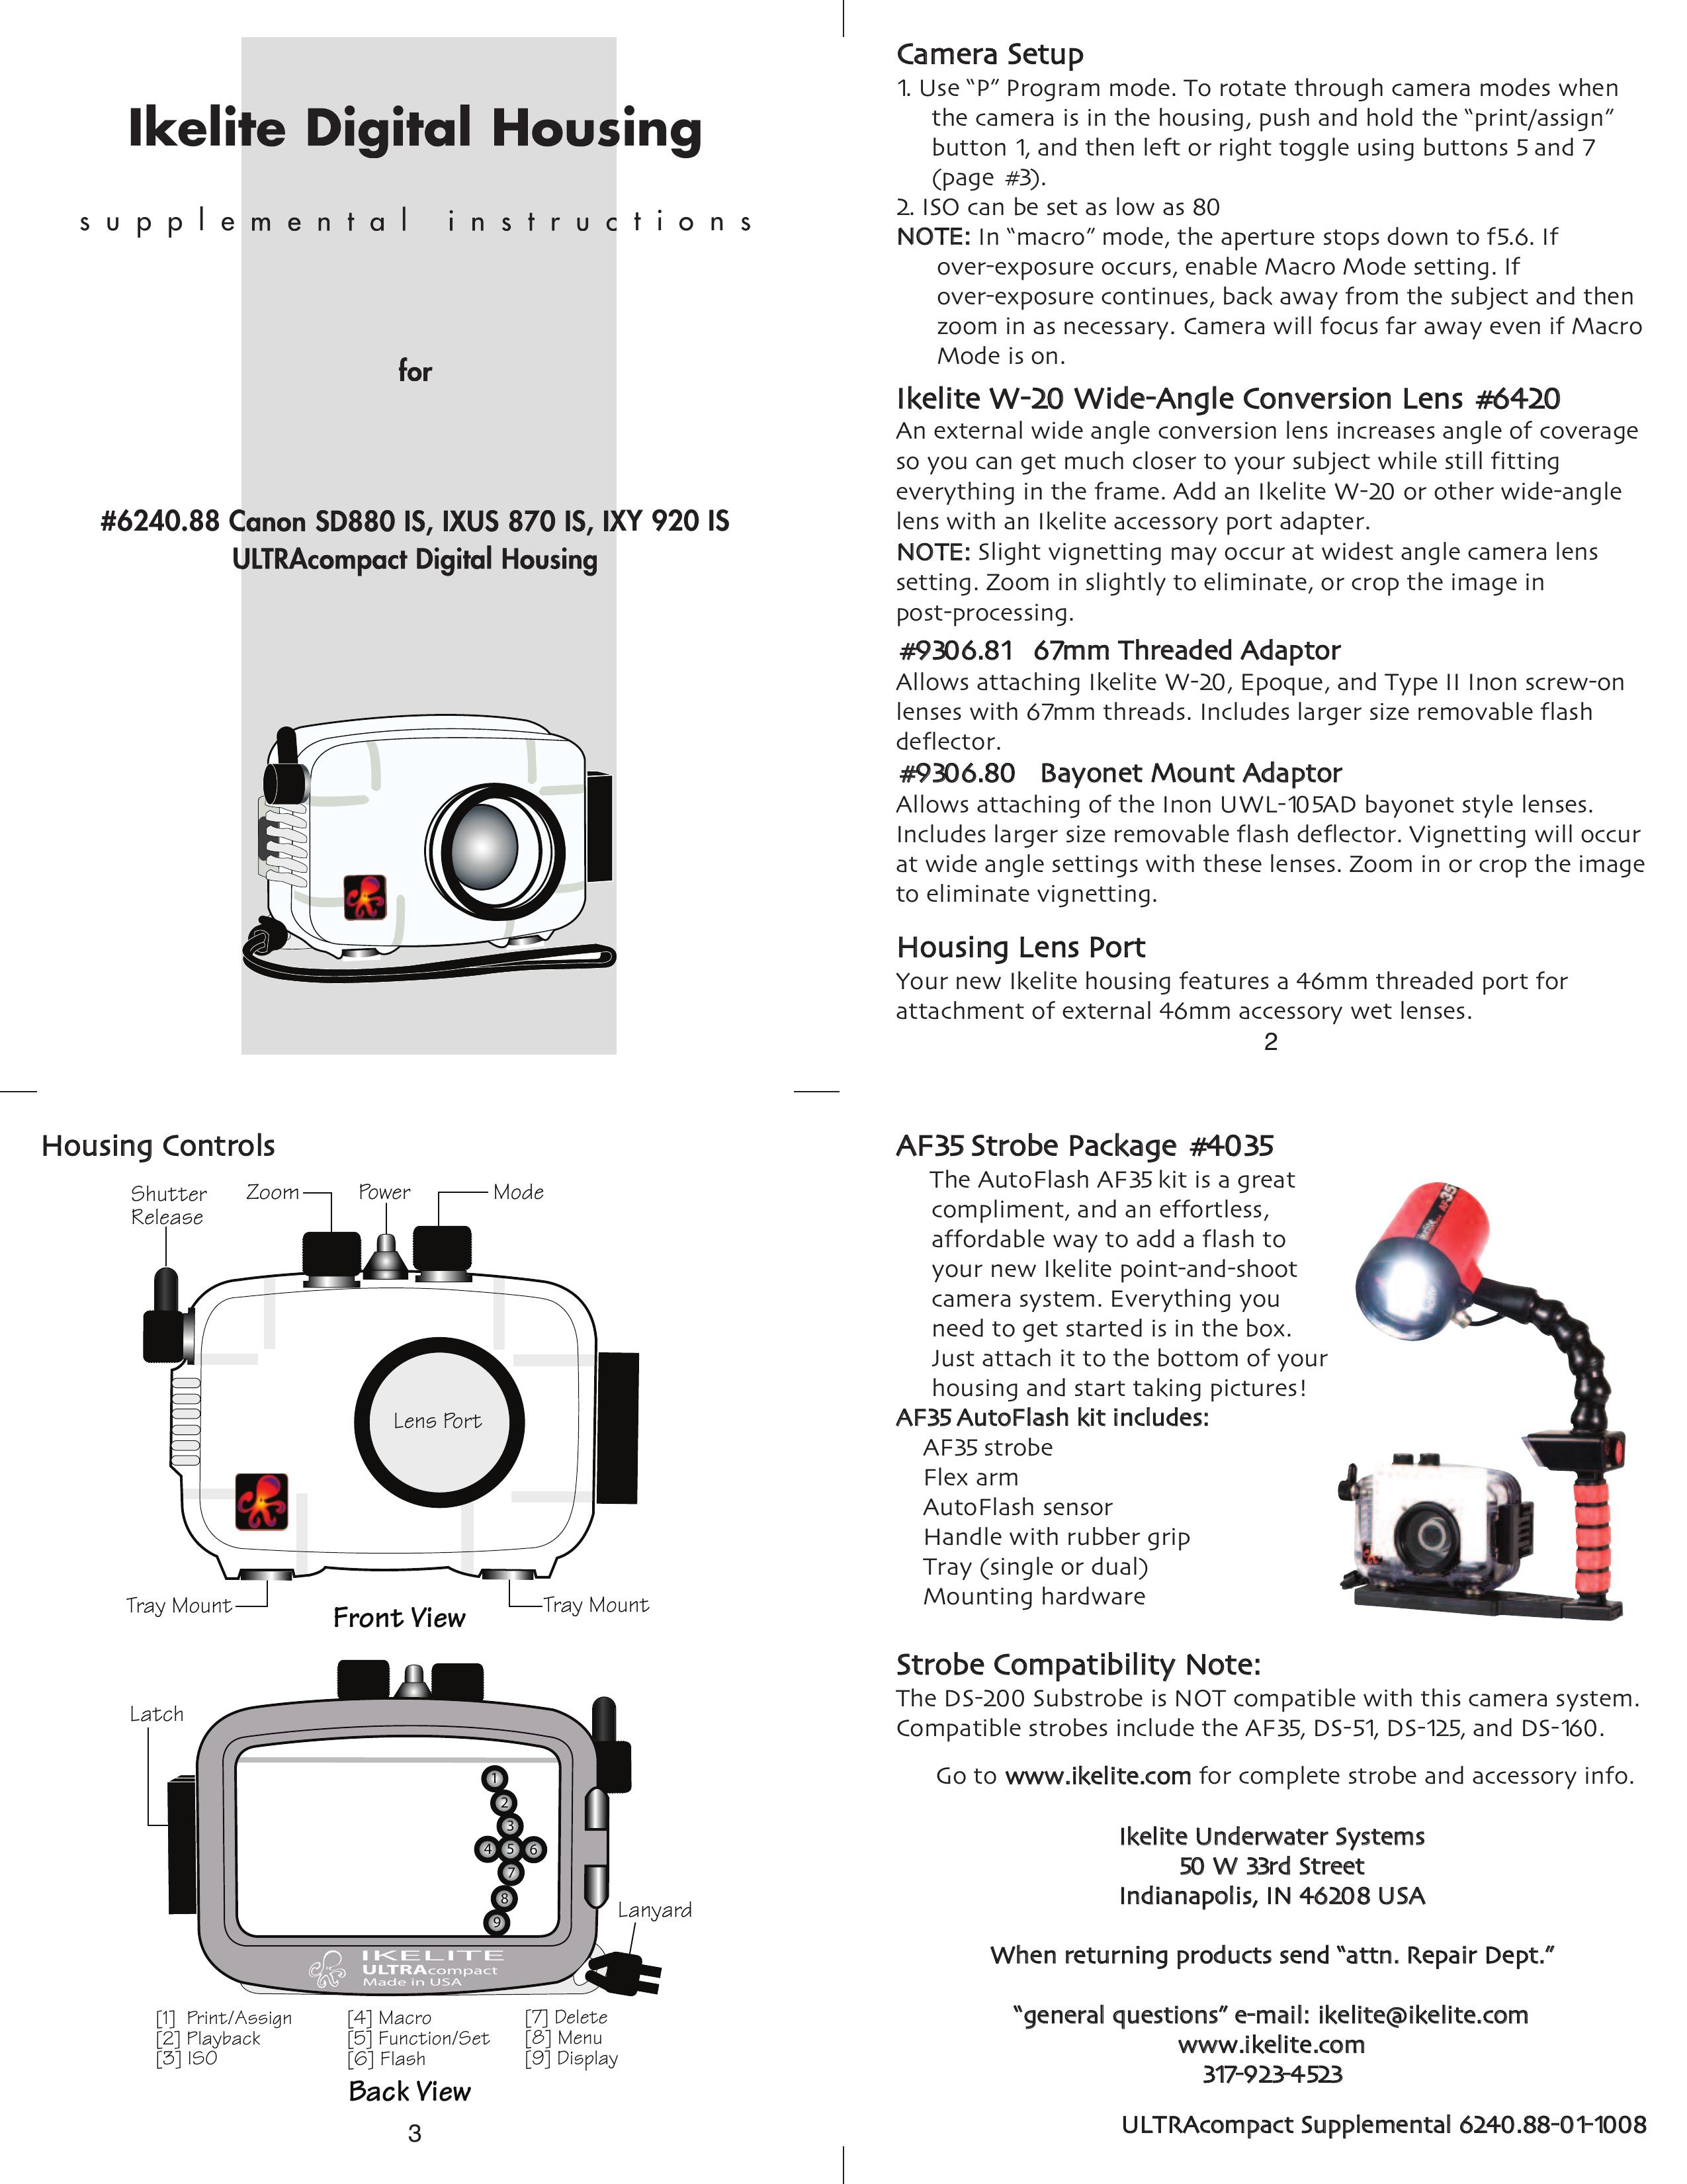 Ikelite IXY 920 IS Camera Accessories User Manual